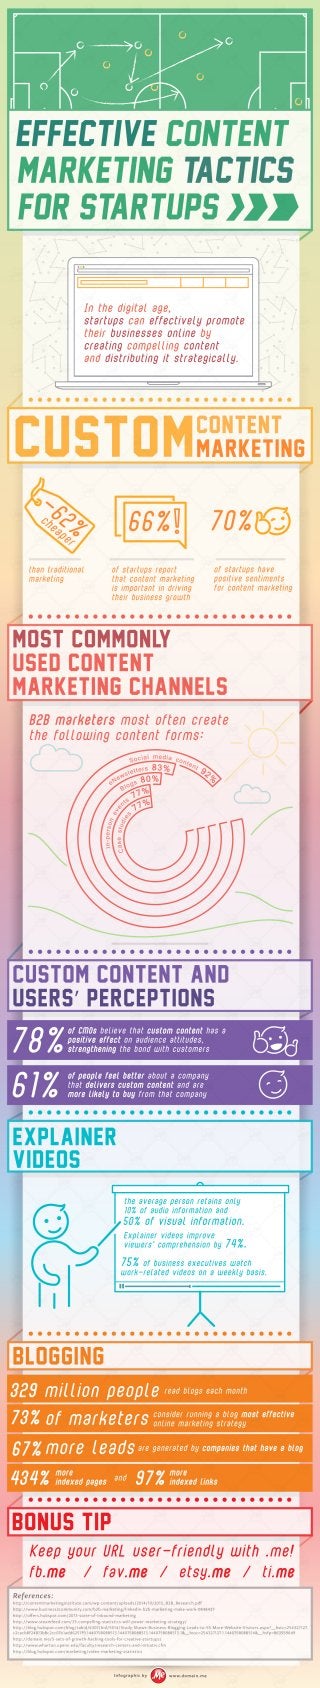 [INFOGRAPHIC] Effective Content Marketing Tactics for Startups